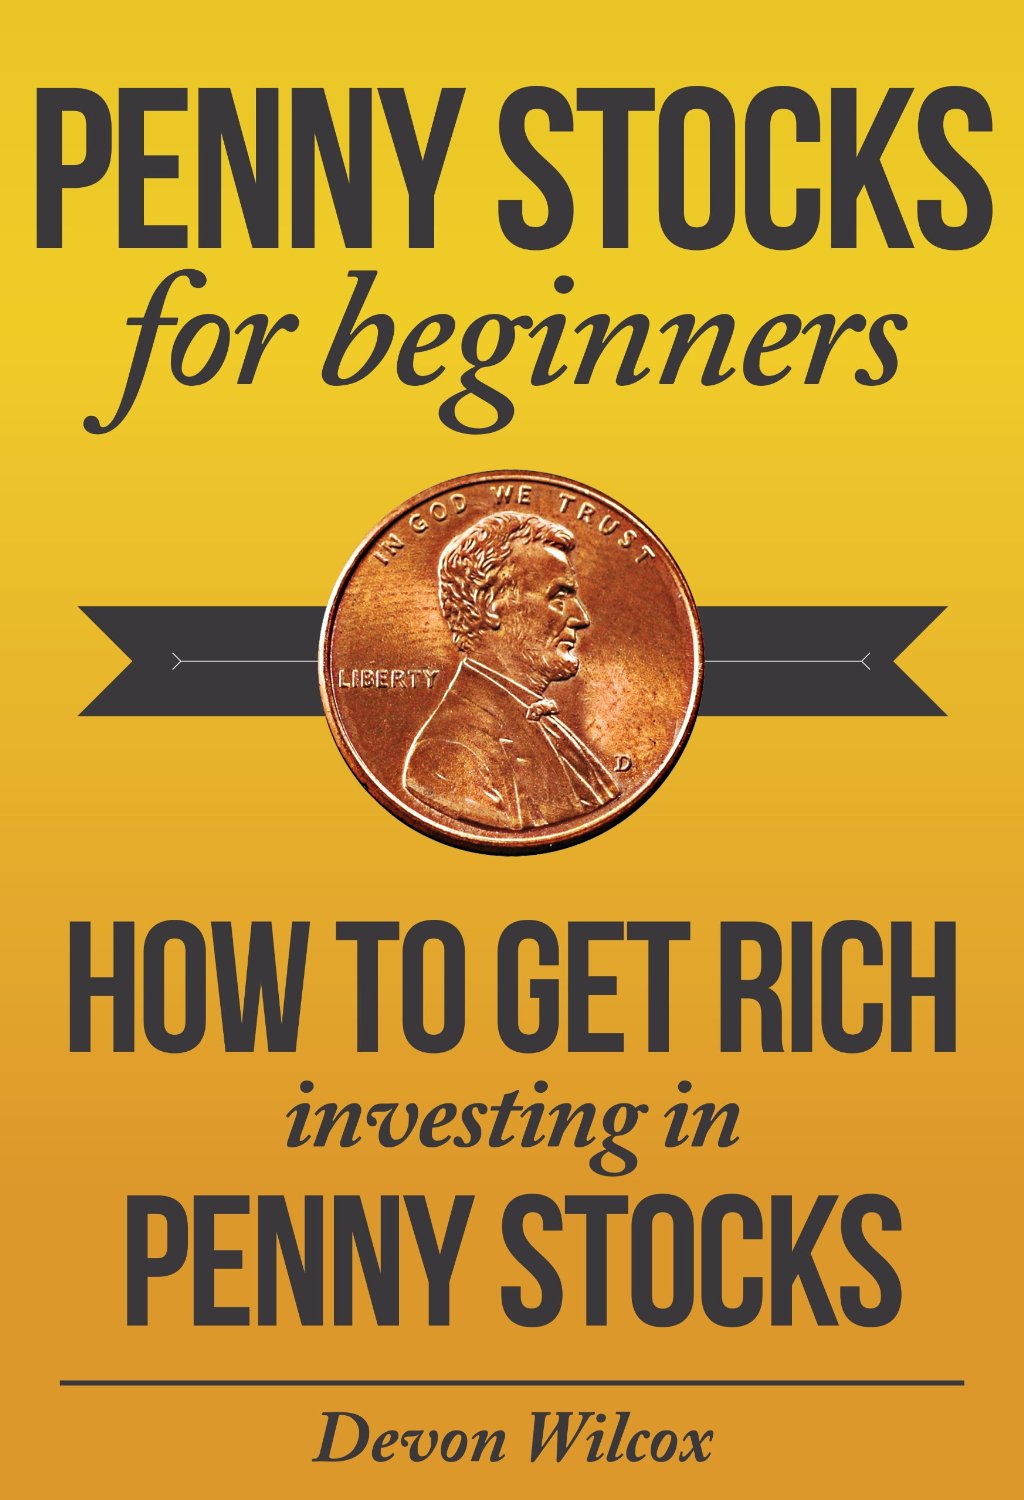 Penny Stocks For Beginners: How to Get Rich Investing In Penny Stocks by Devon Wilcox